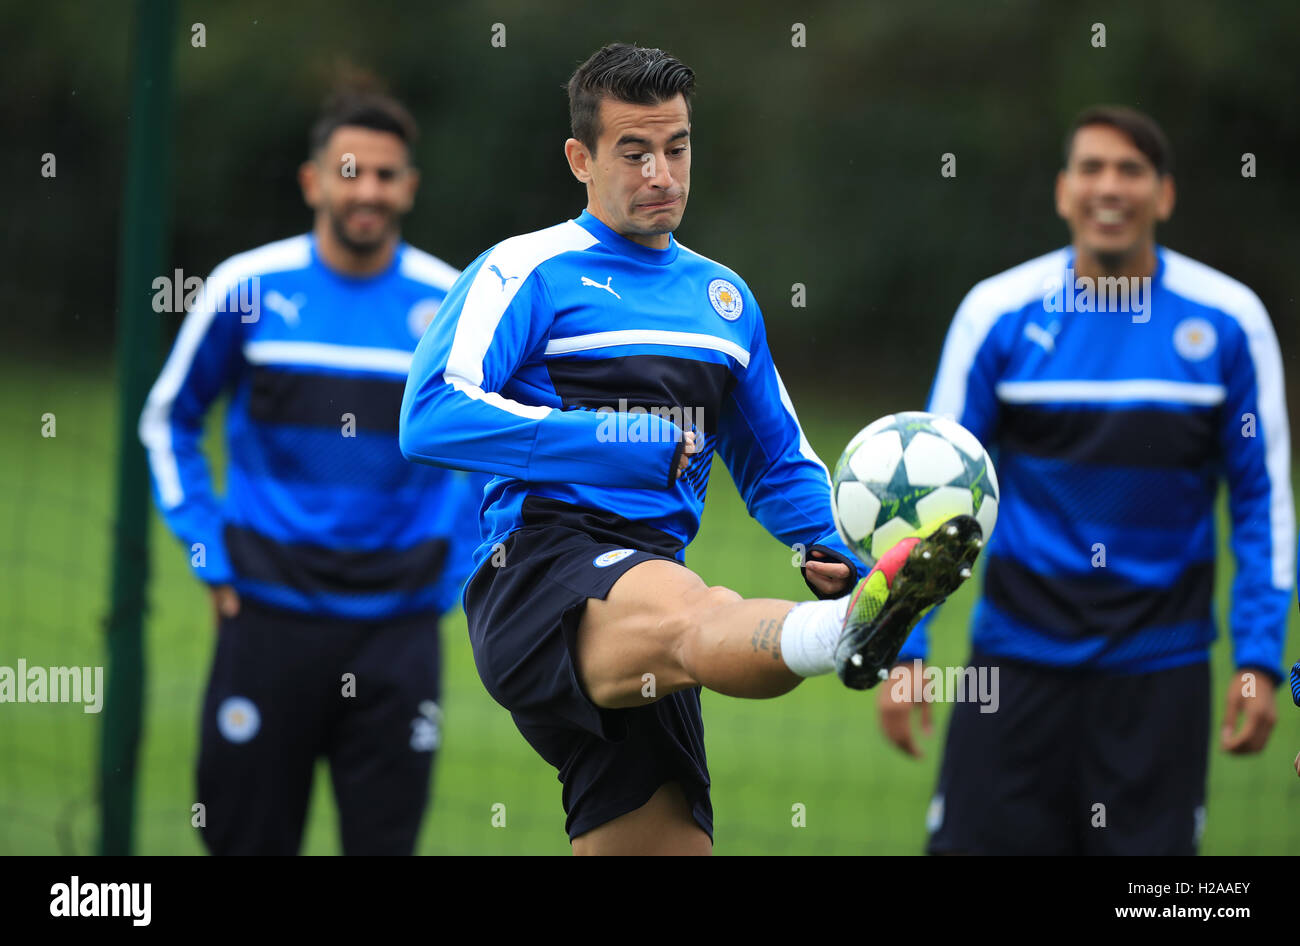 Leicester City's Luis Hernandez Rodriguez during a training session at Belvoir Drive Training Ground, Leicester. Stock Photo